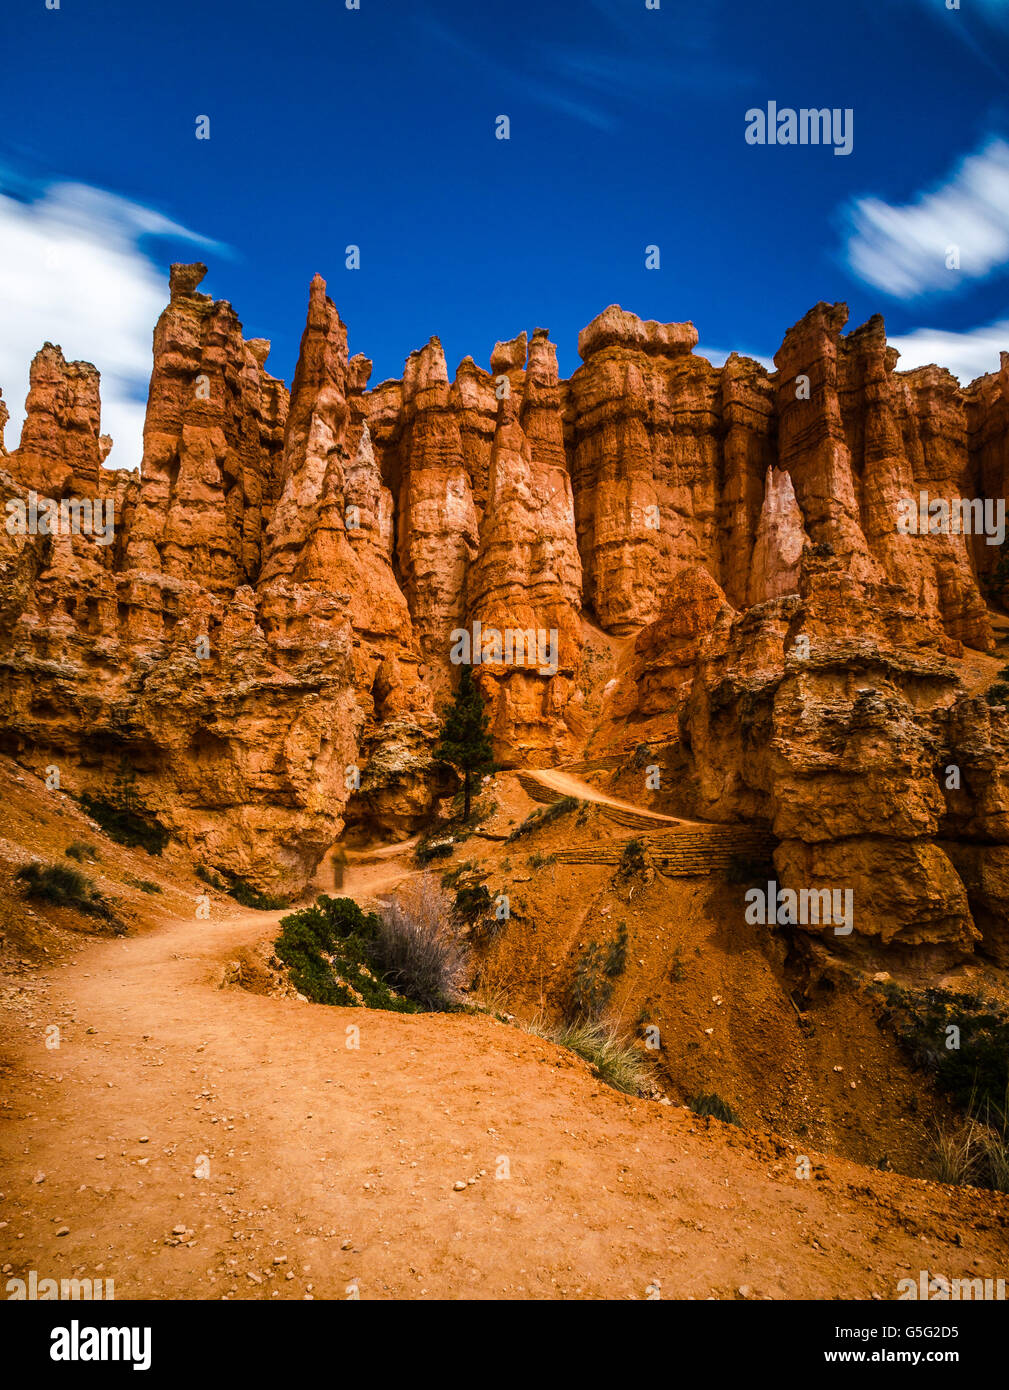 An Adventure in Bryce Canyon National Park Stock Photo